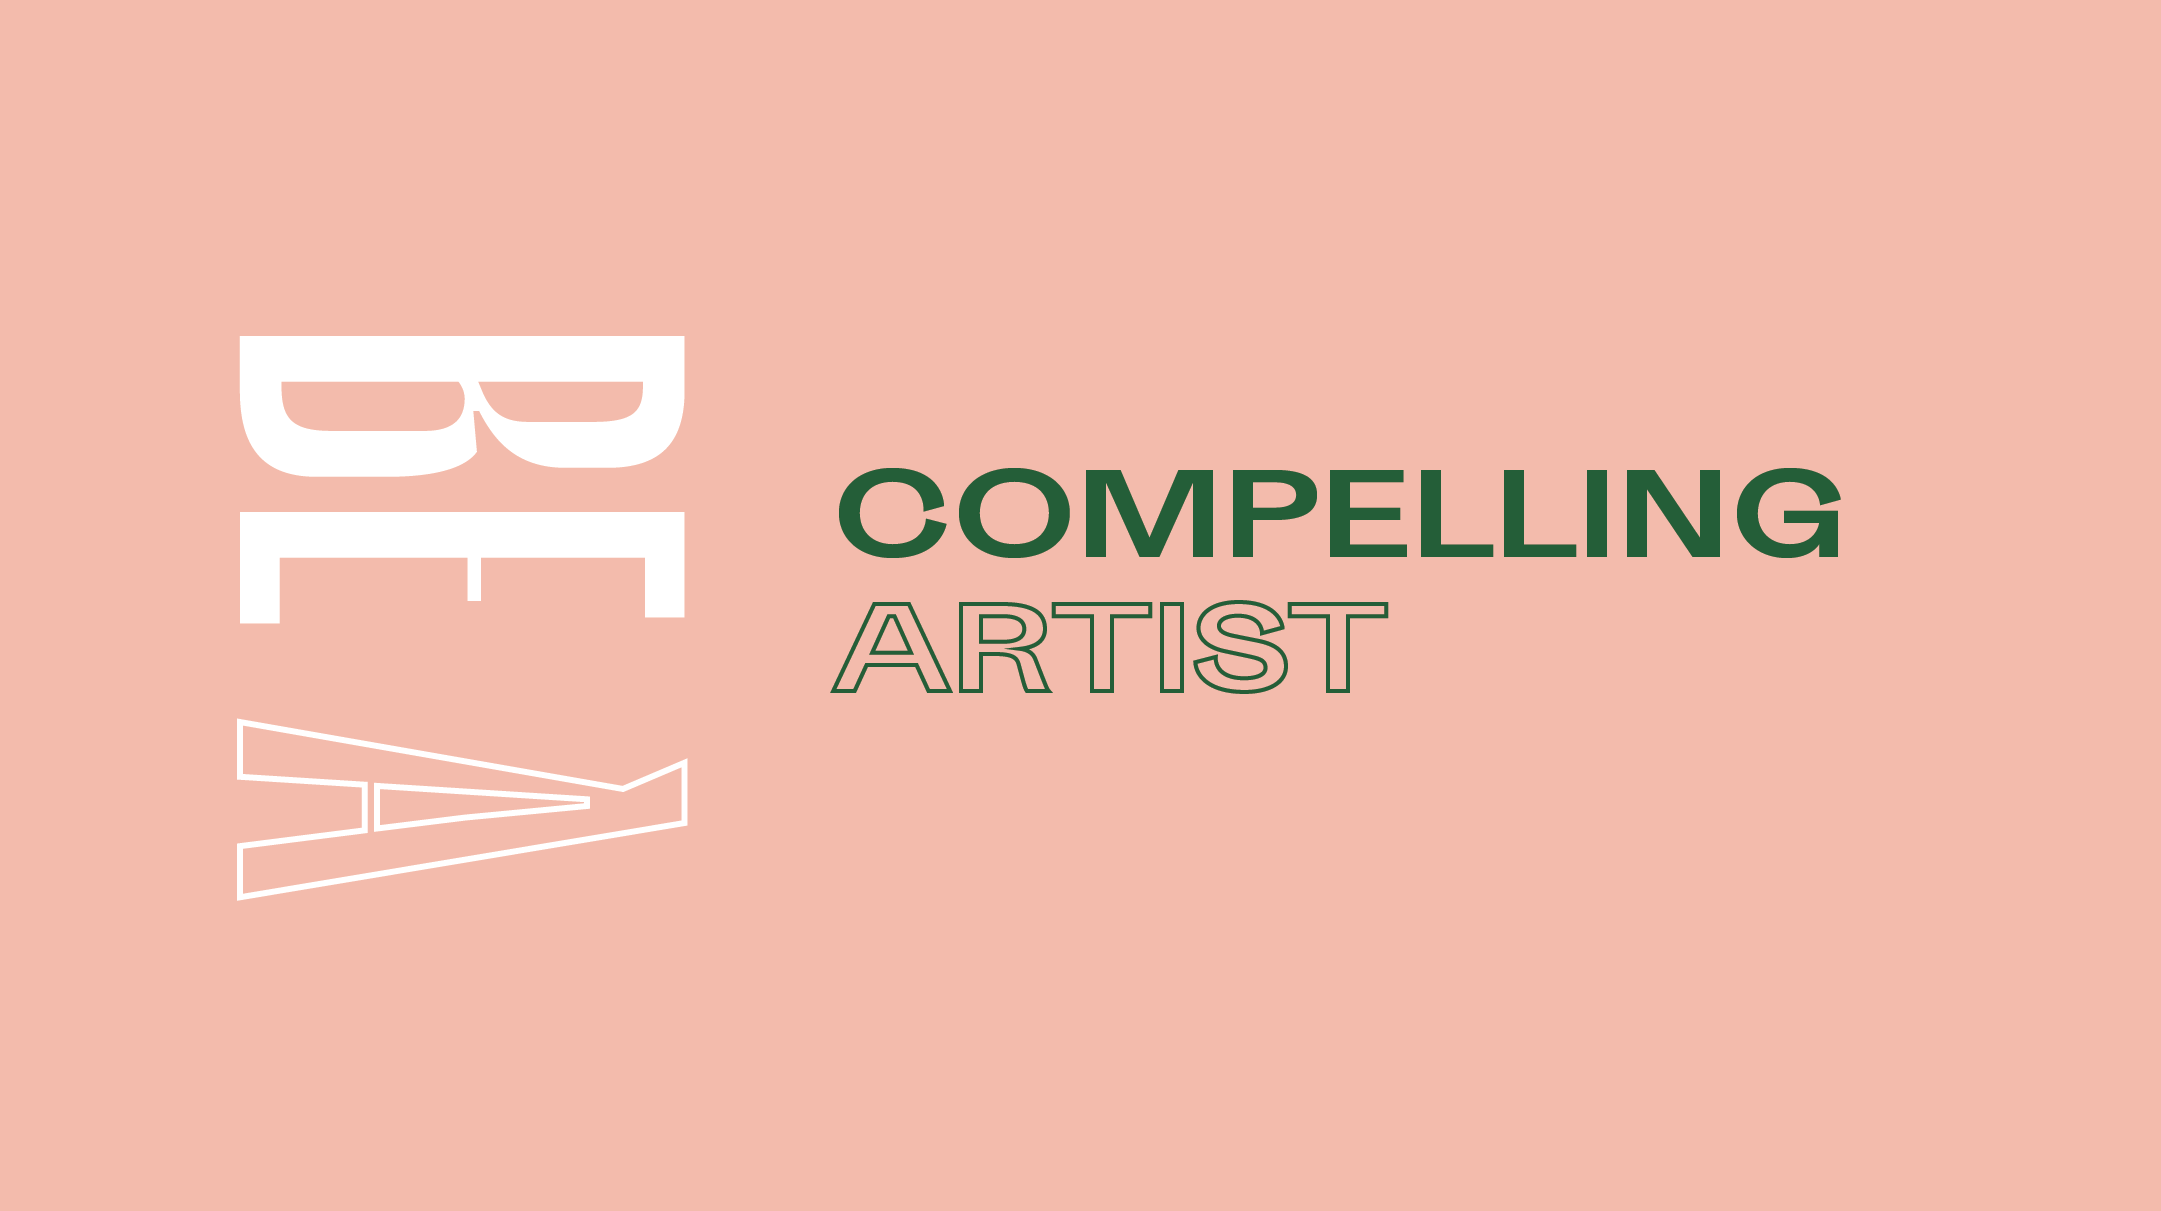 Be A Compelling Artist